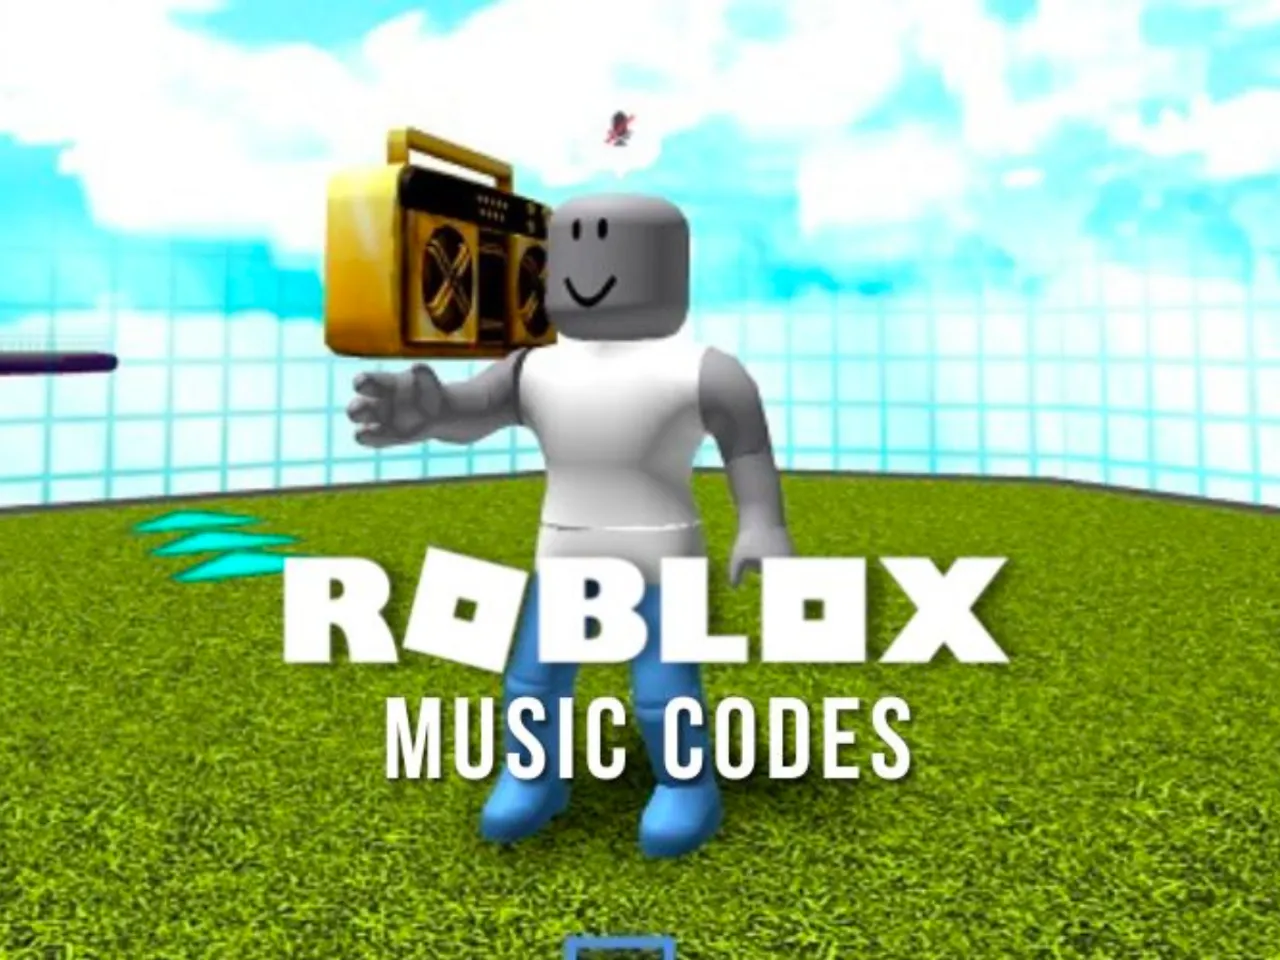 Roblox Music Codes & Song IDs